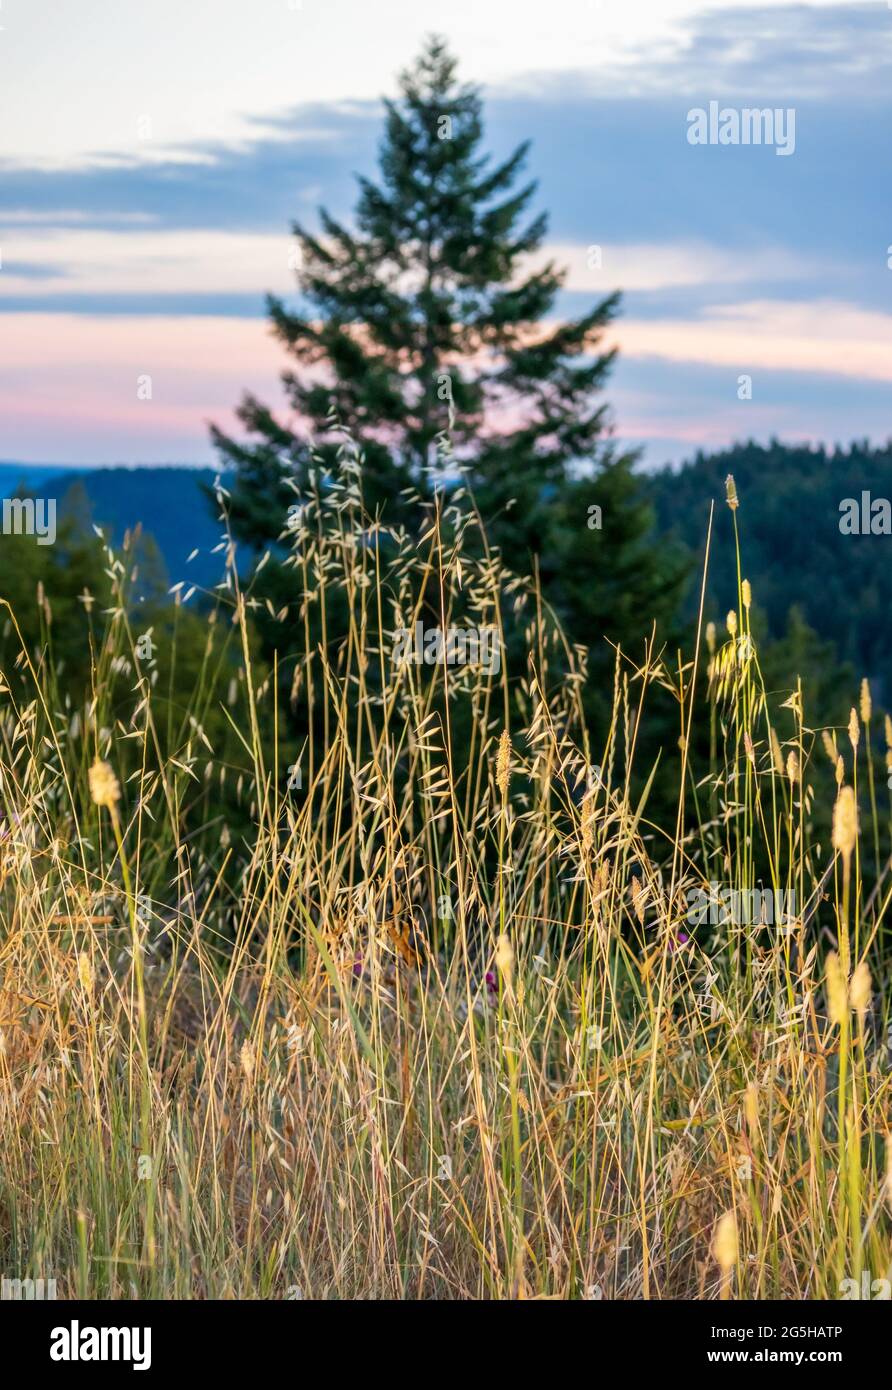 Yellow grass close-up with the spruce tree and mountain forest in the background. Notothen Californian landscape. Stock Photo